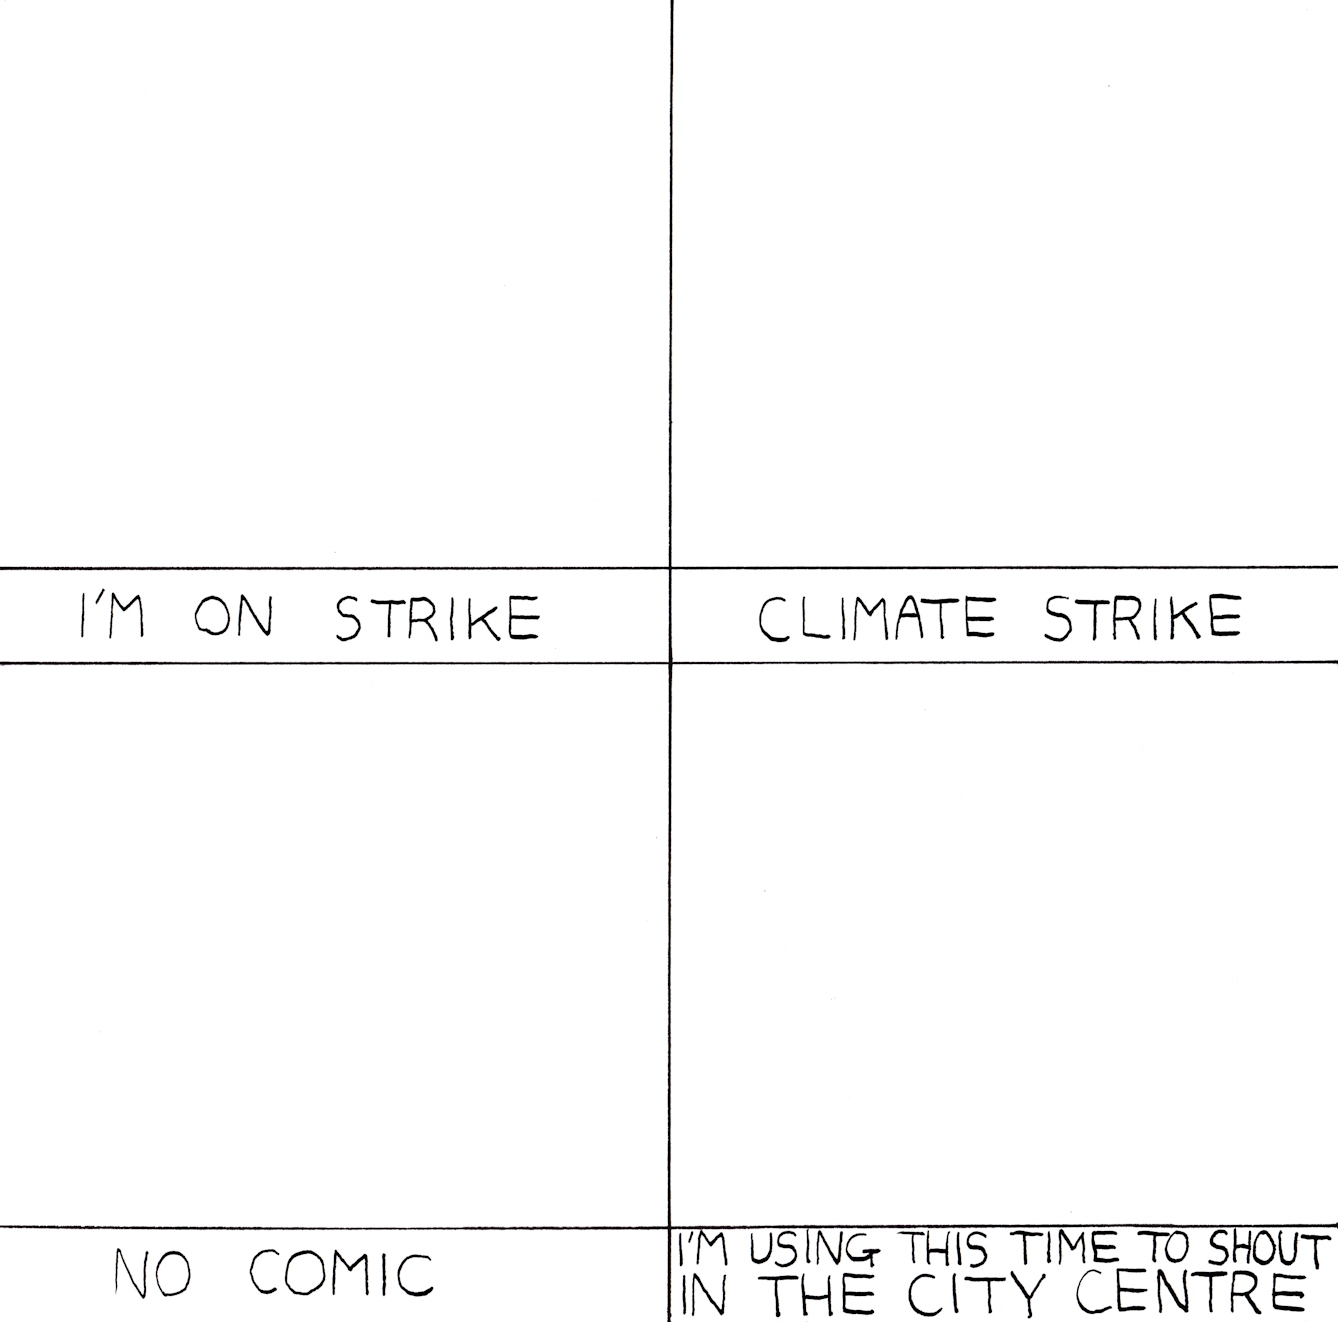 Strike comic by Rob Bidder.  Each panel is blank and the text explains that Rob is on climate strike.